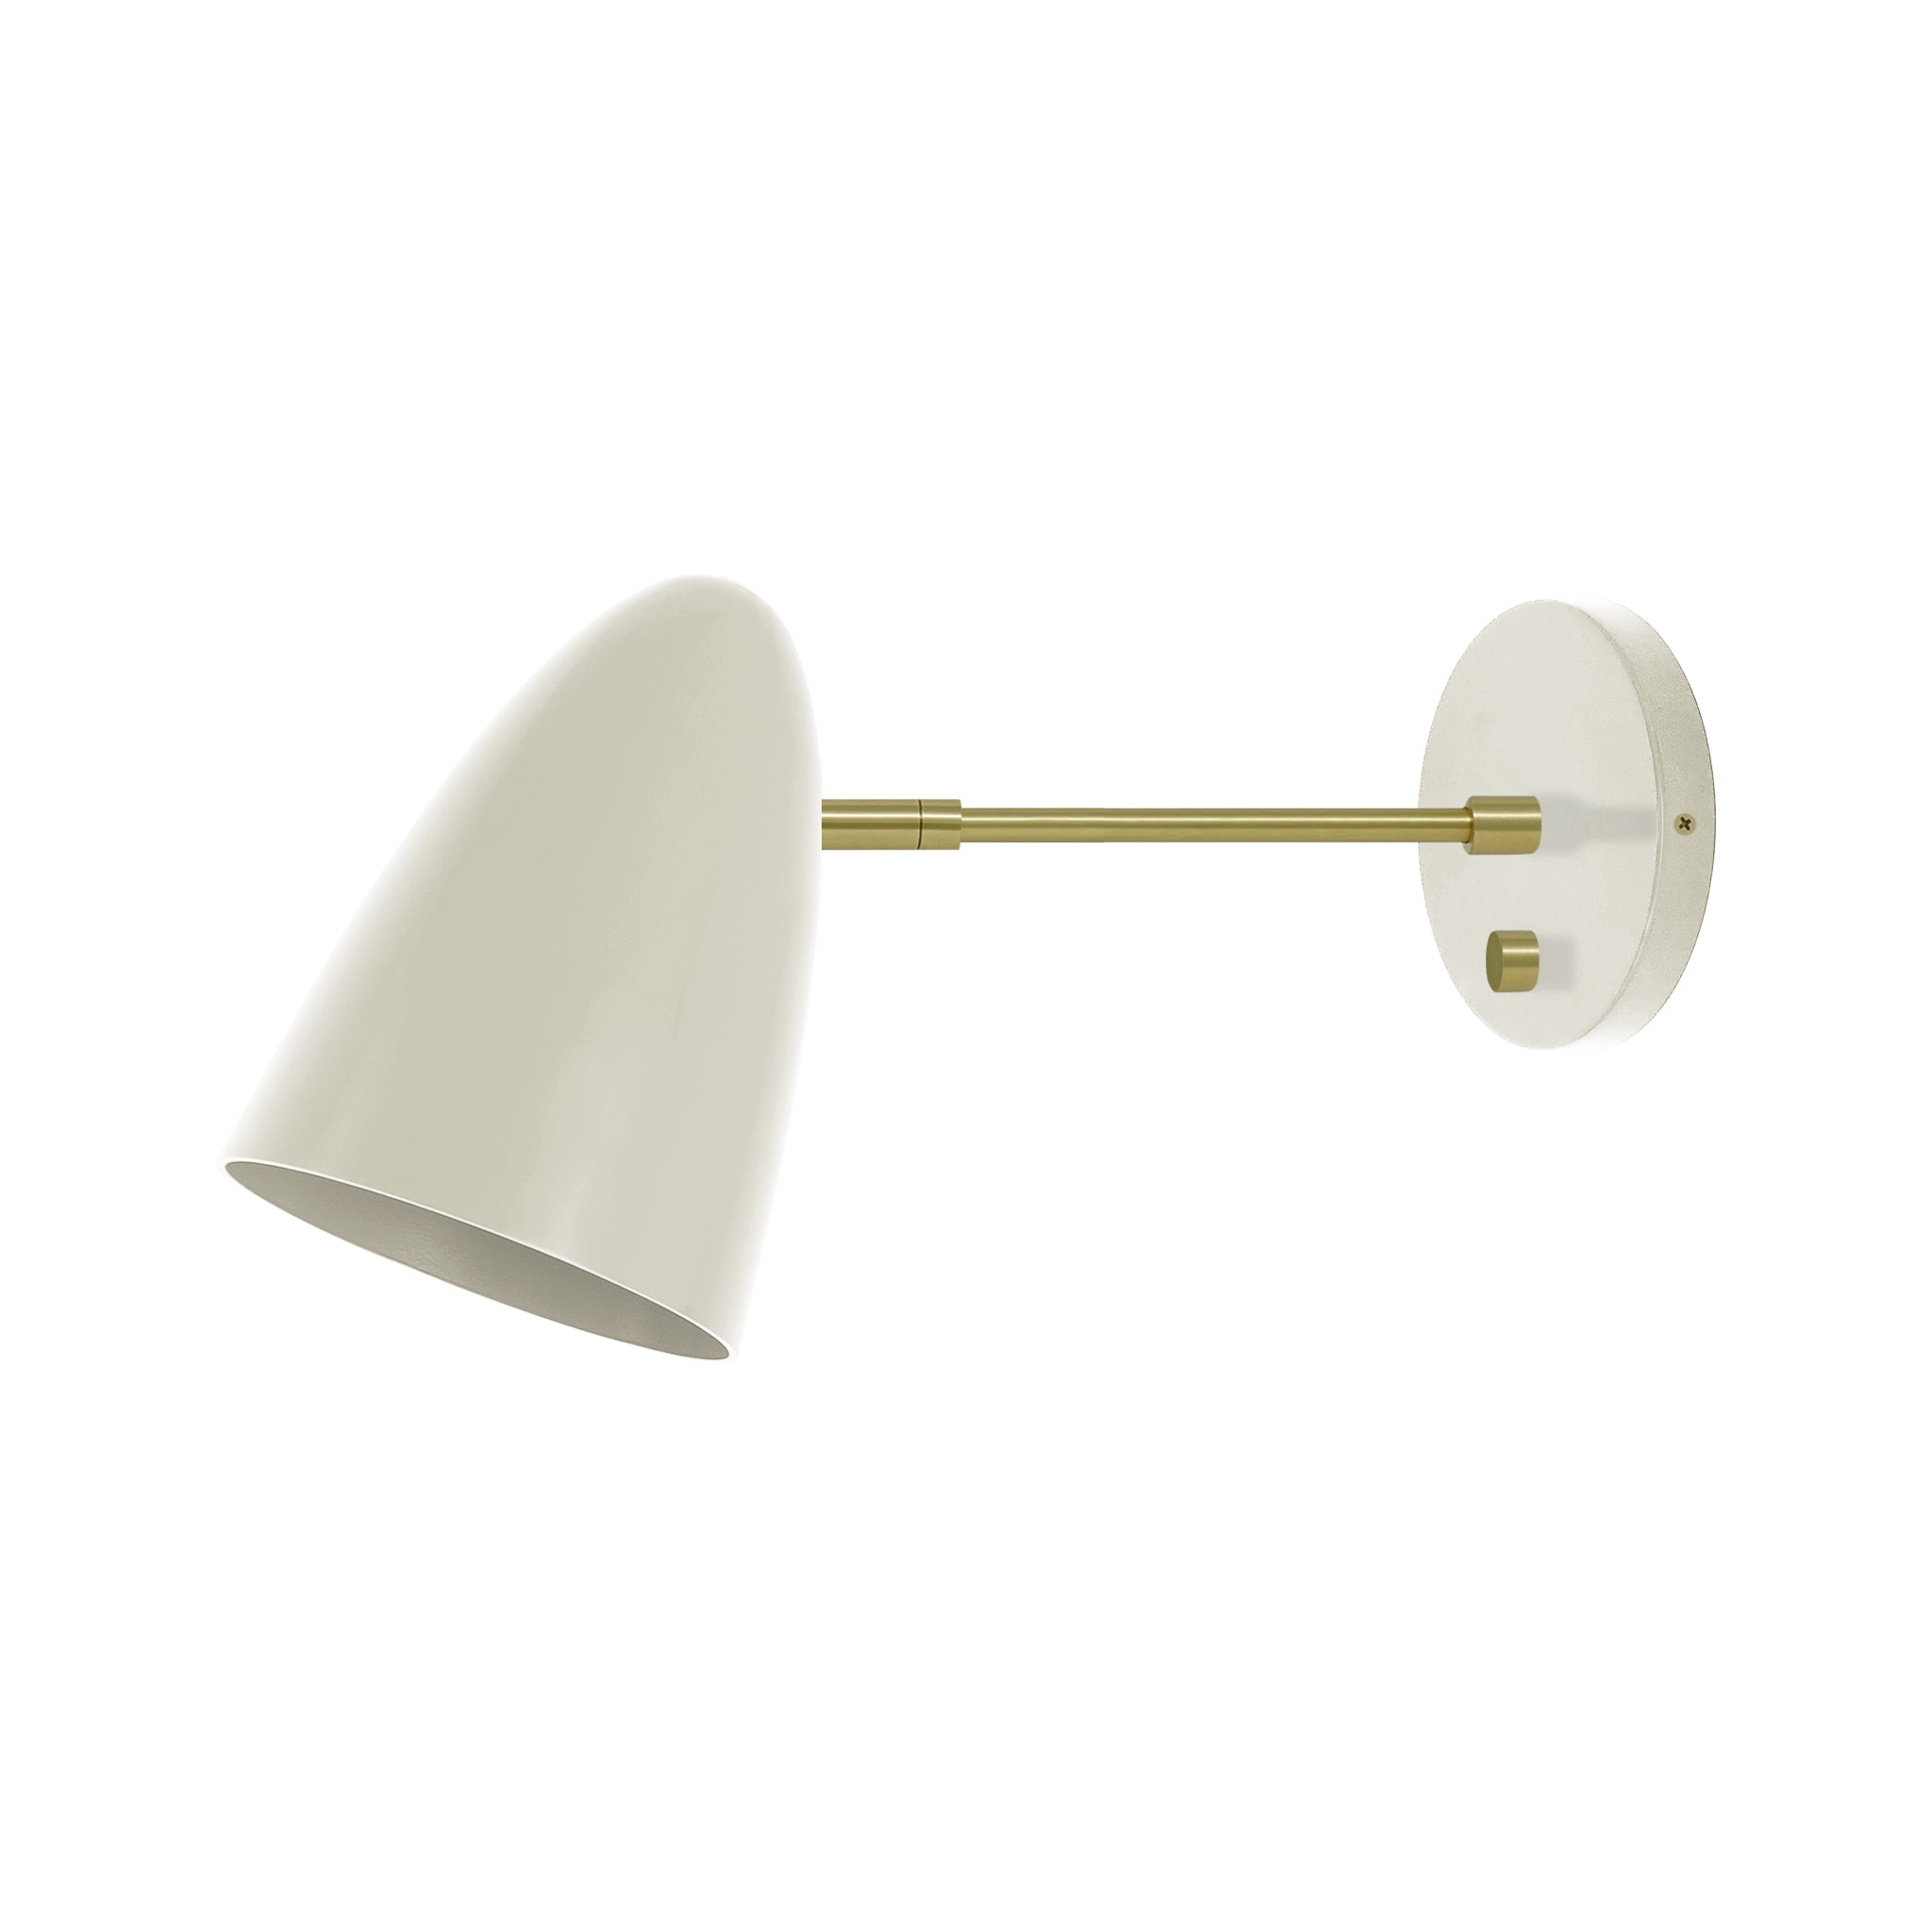 Brass and bone color Boom sconce 6" arm Dutton Brown lighting